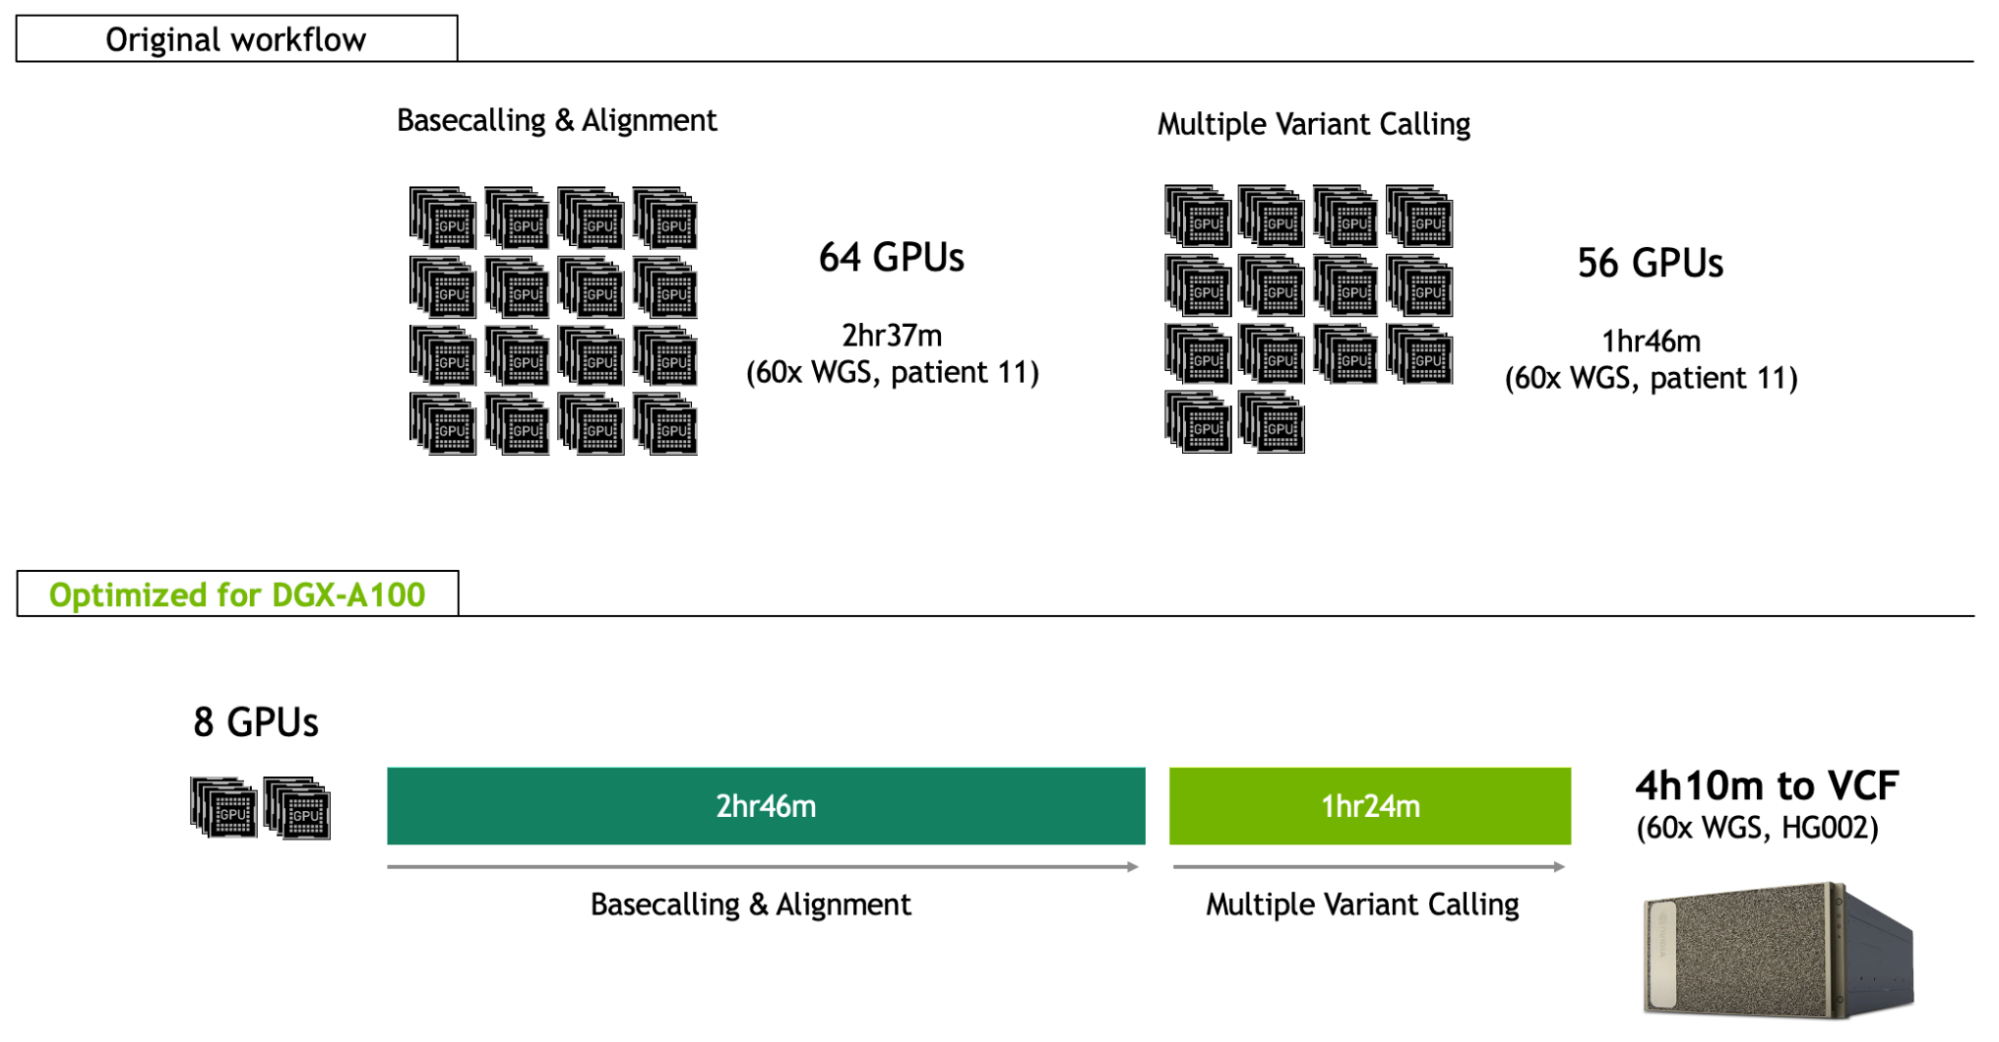 Visual representation of the GPUs used for the original record, including 64 GPUs for basecalling and alignment, and 56 GPUs for the multiple variant calling steps. Diagram also shows the workflow optimized for the DGX-A100, using just 8 GPUs. Benchmark times displayed for HG002 whole genome reference sample, sequencing to a similar depth of coverage as Patient 11 (60x).